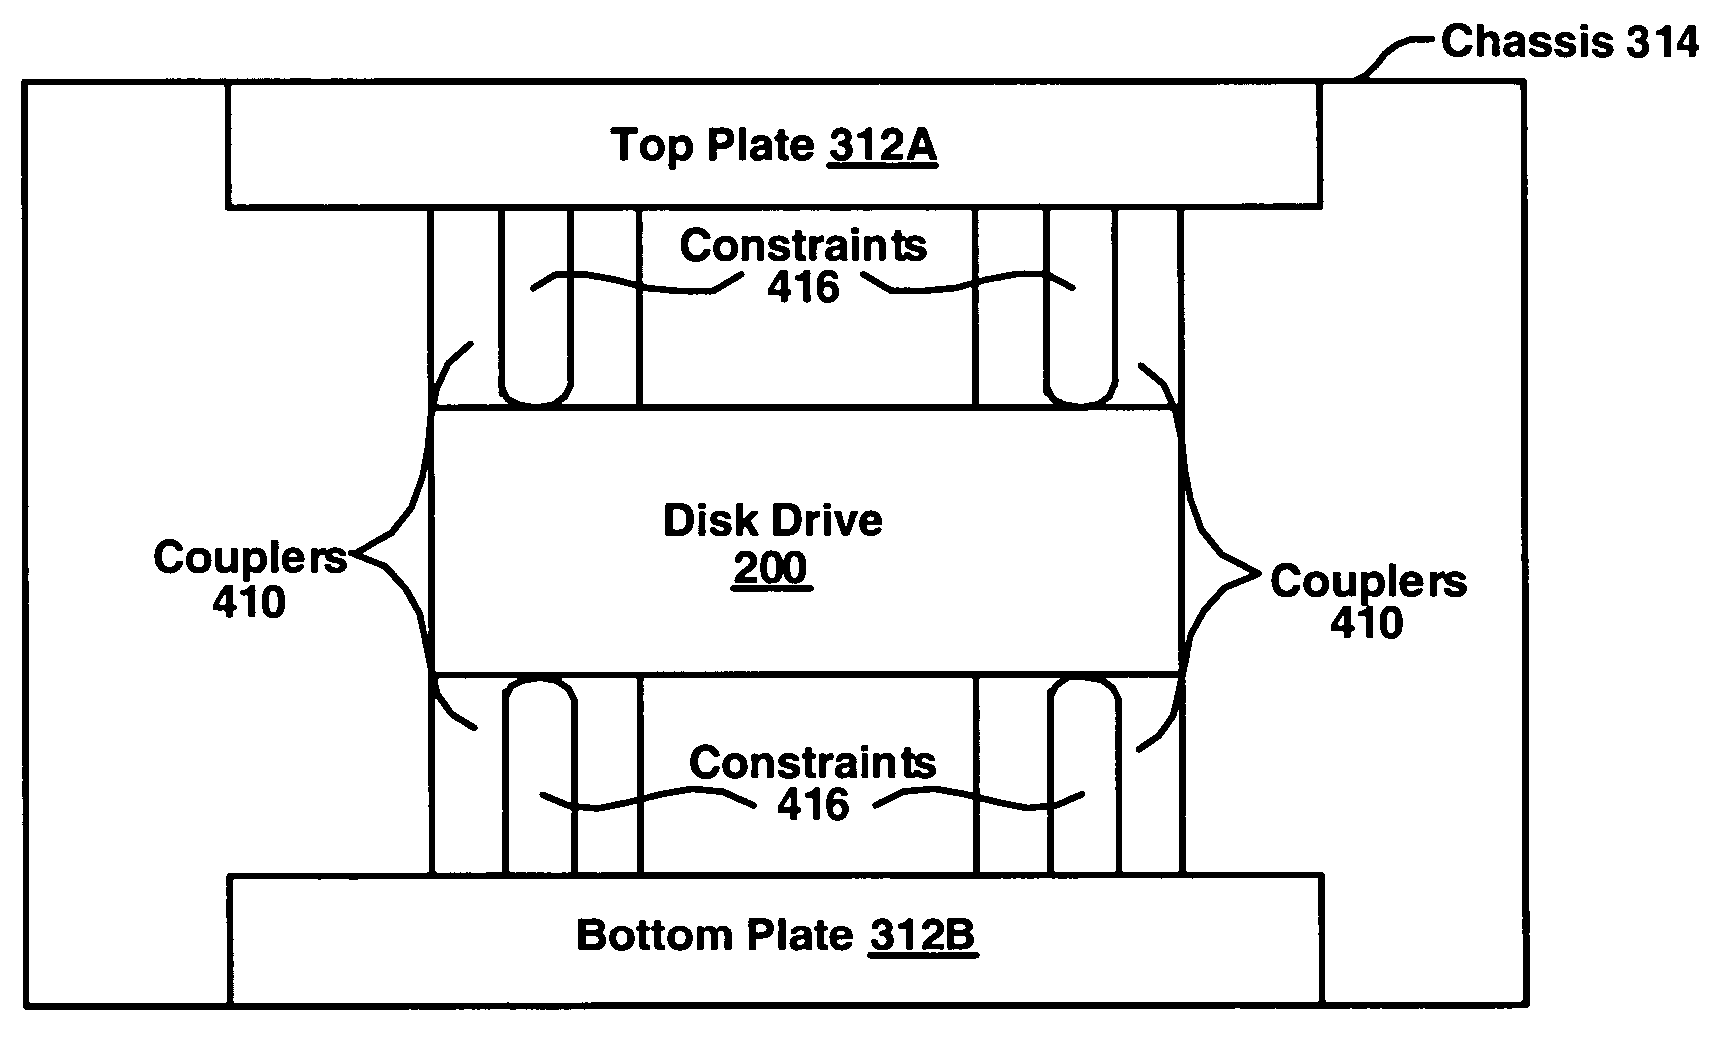 System and method for rigidly coupling a disk drive to a chassis of a computer